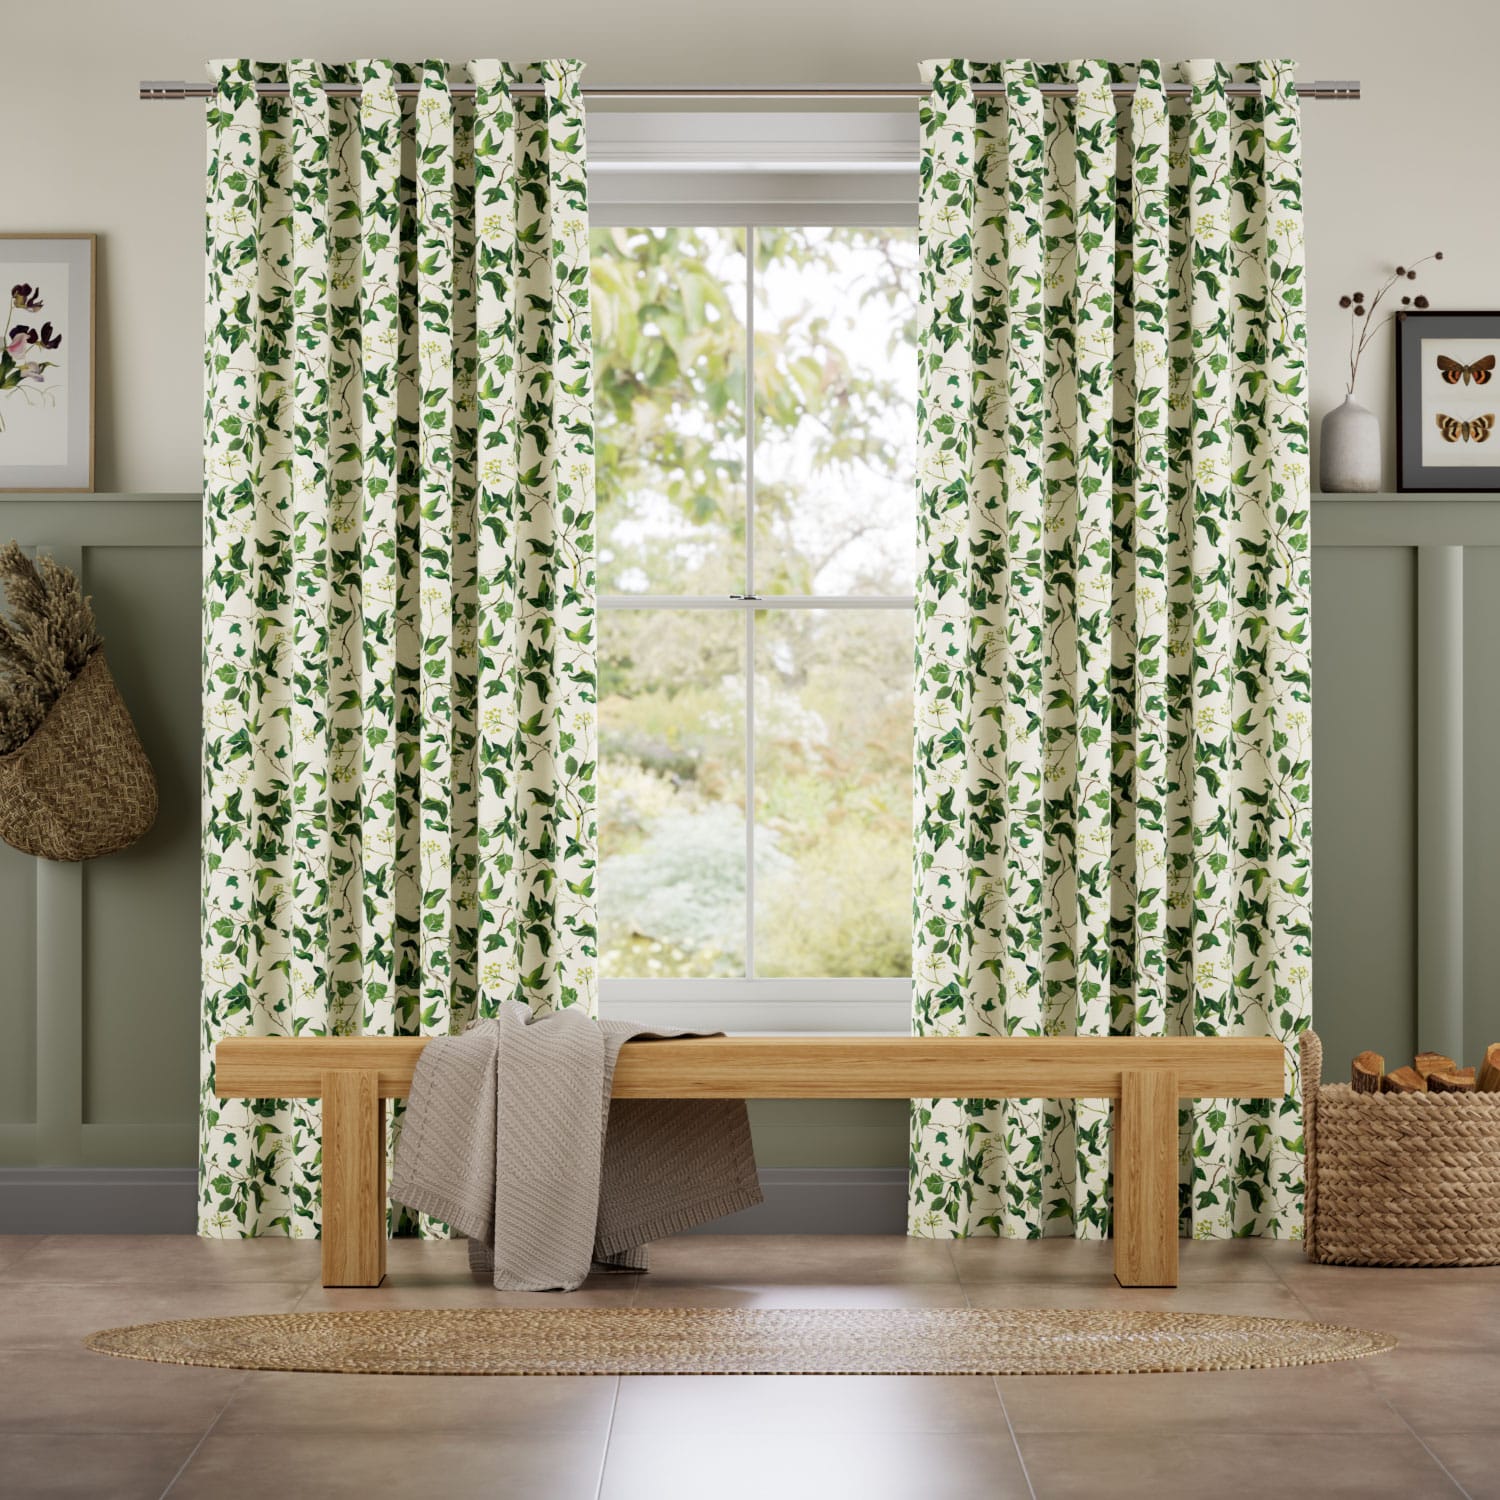 Ivy Green Curtains